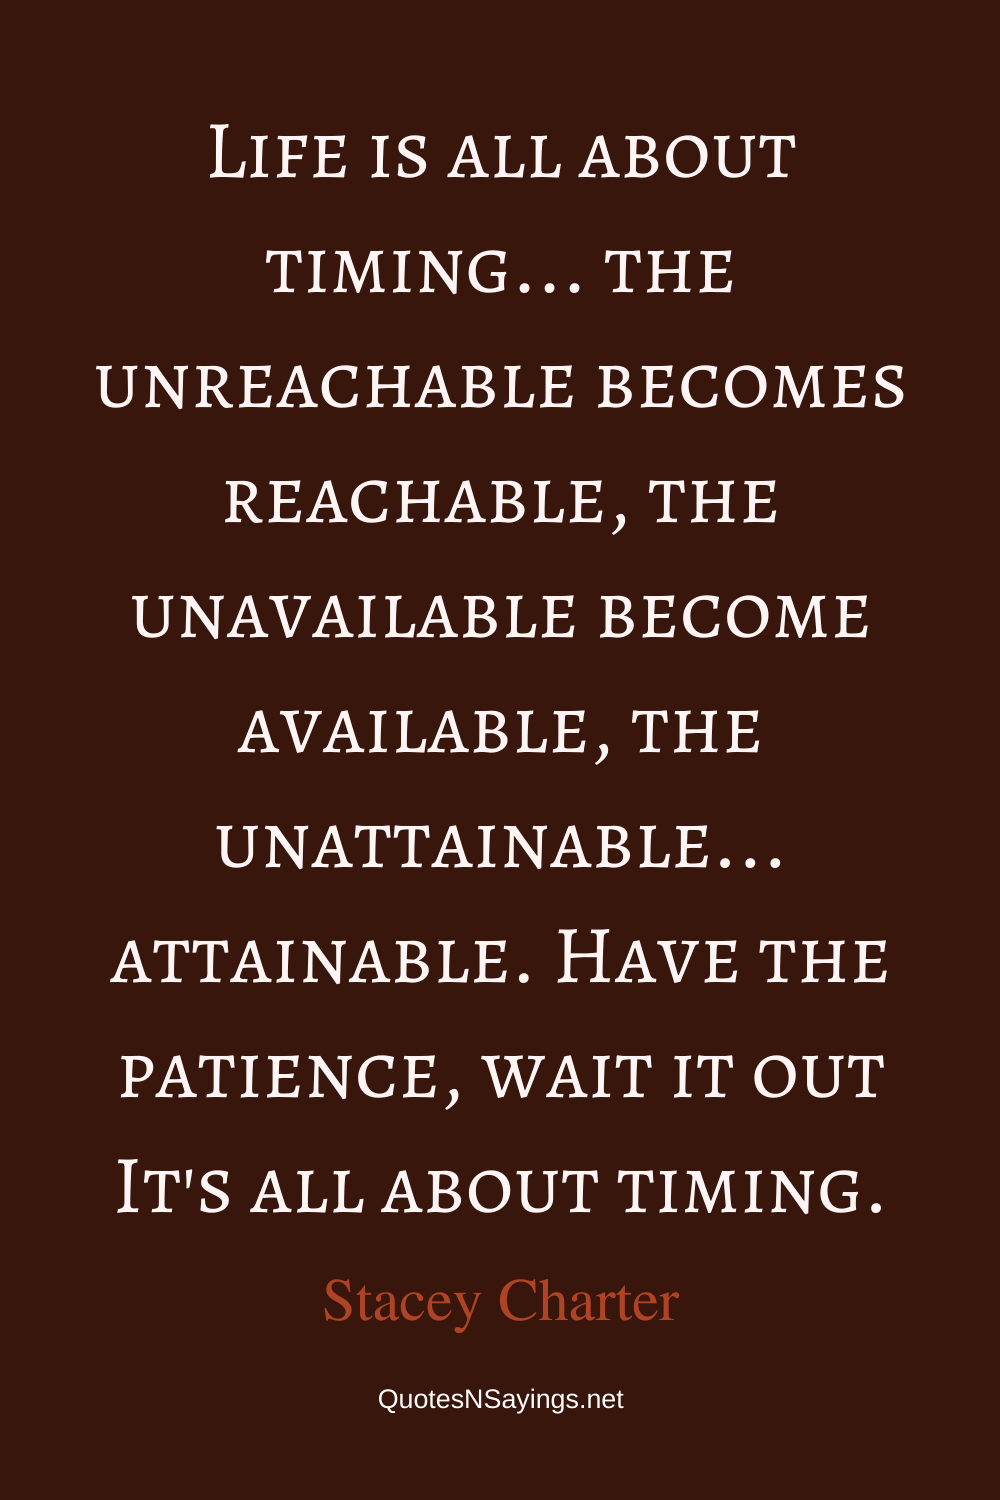 Stacey Charter quote - Life is all about timing ...